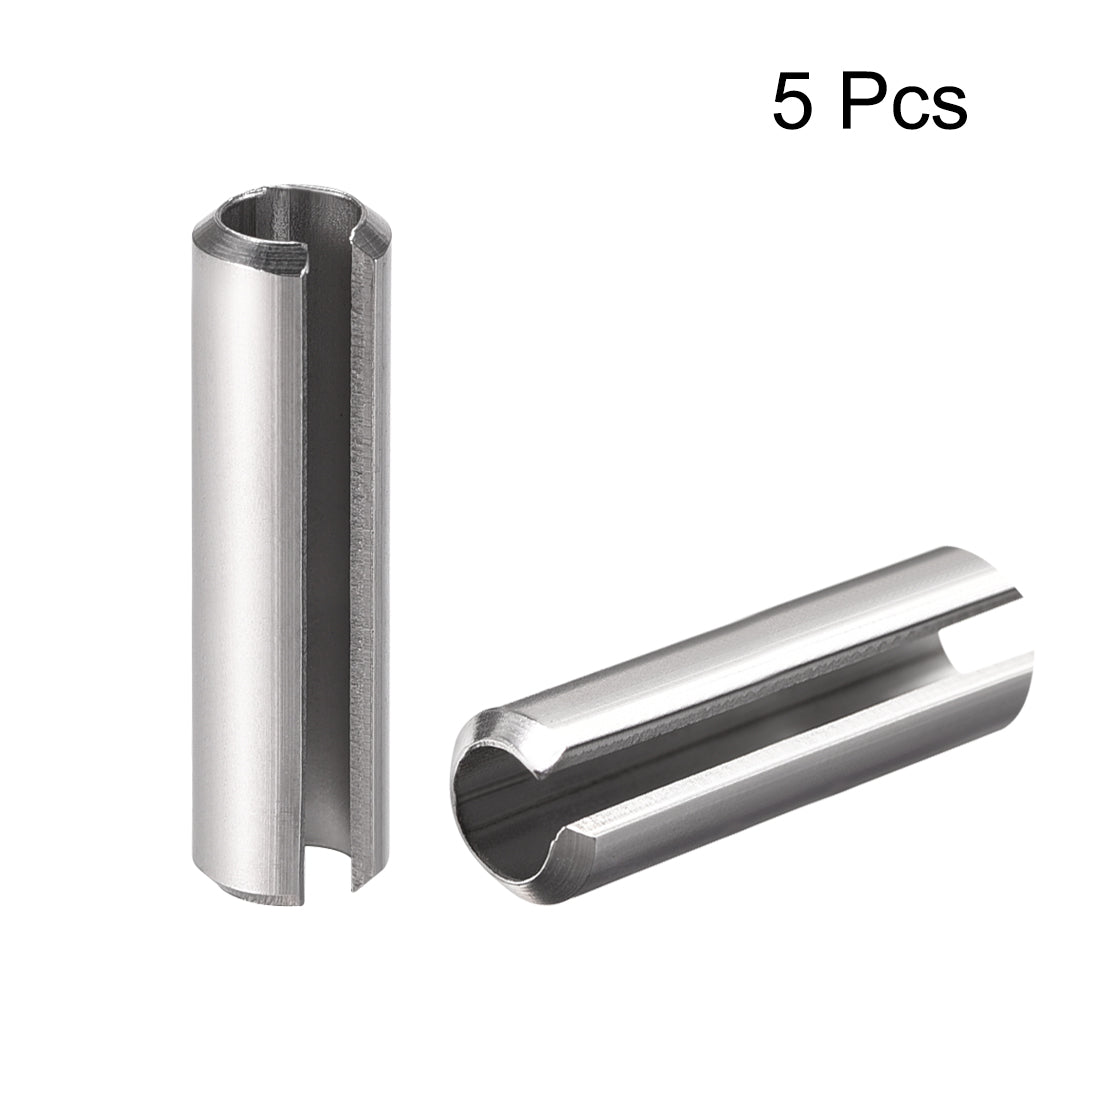 Uxcell Uxcell M8 x 25mm 304 Stainless Steel Split Spring Roll Dowel Pins Plain Finish 5Pcs